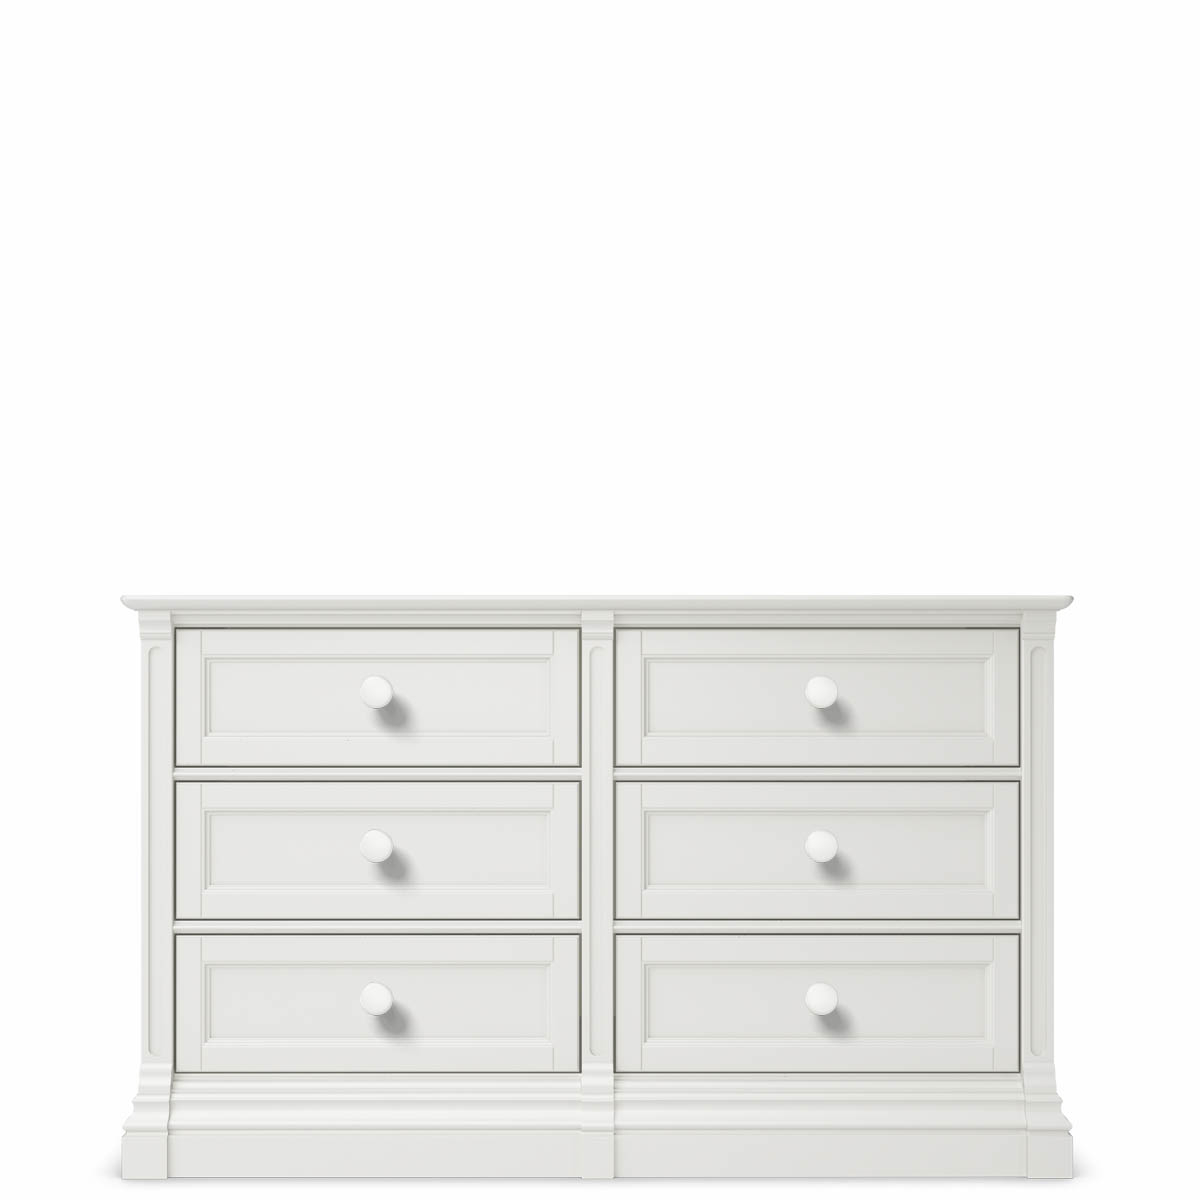 Romina Imperio Double Dresser - Solid White - In Stock